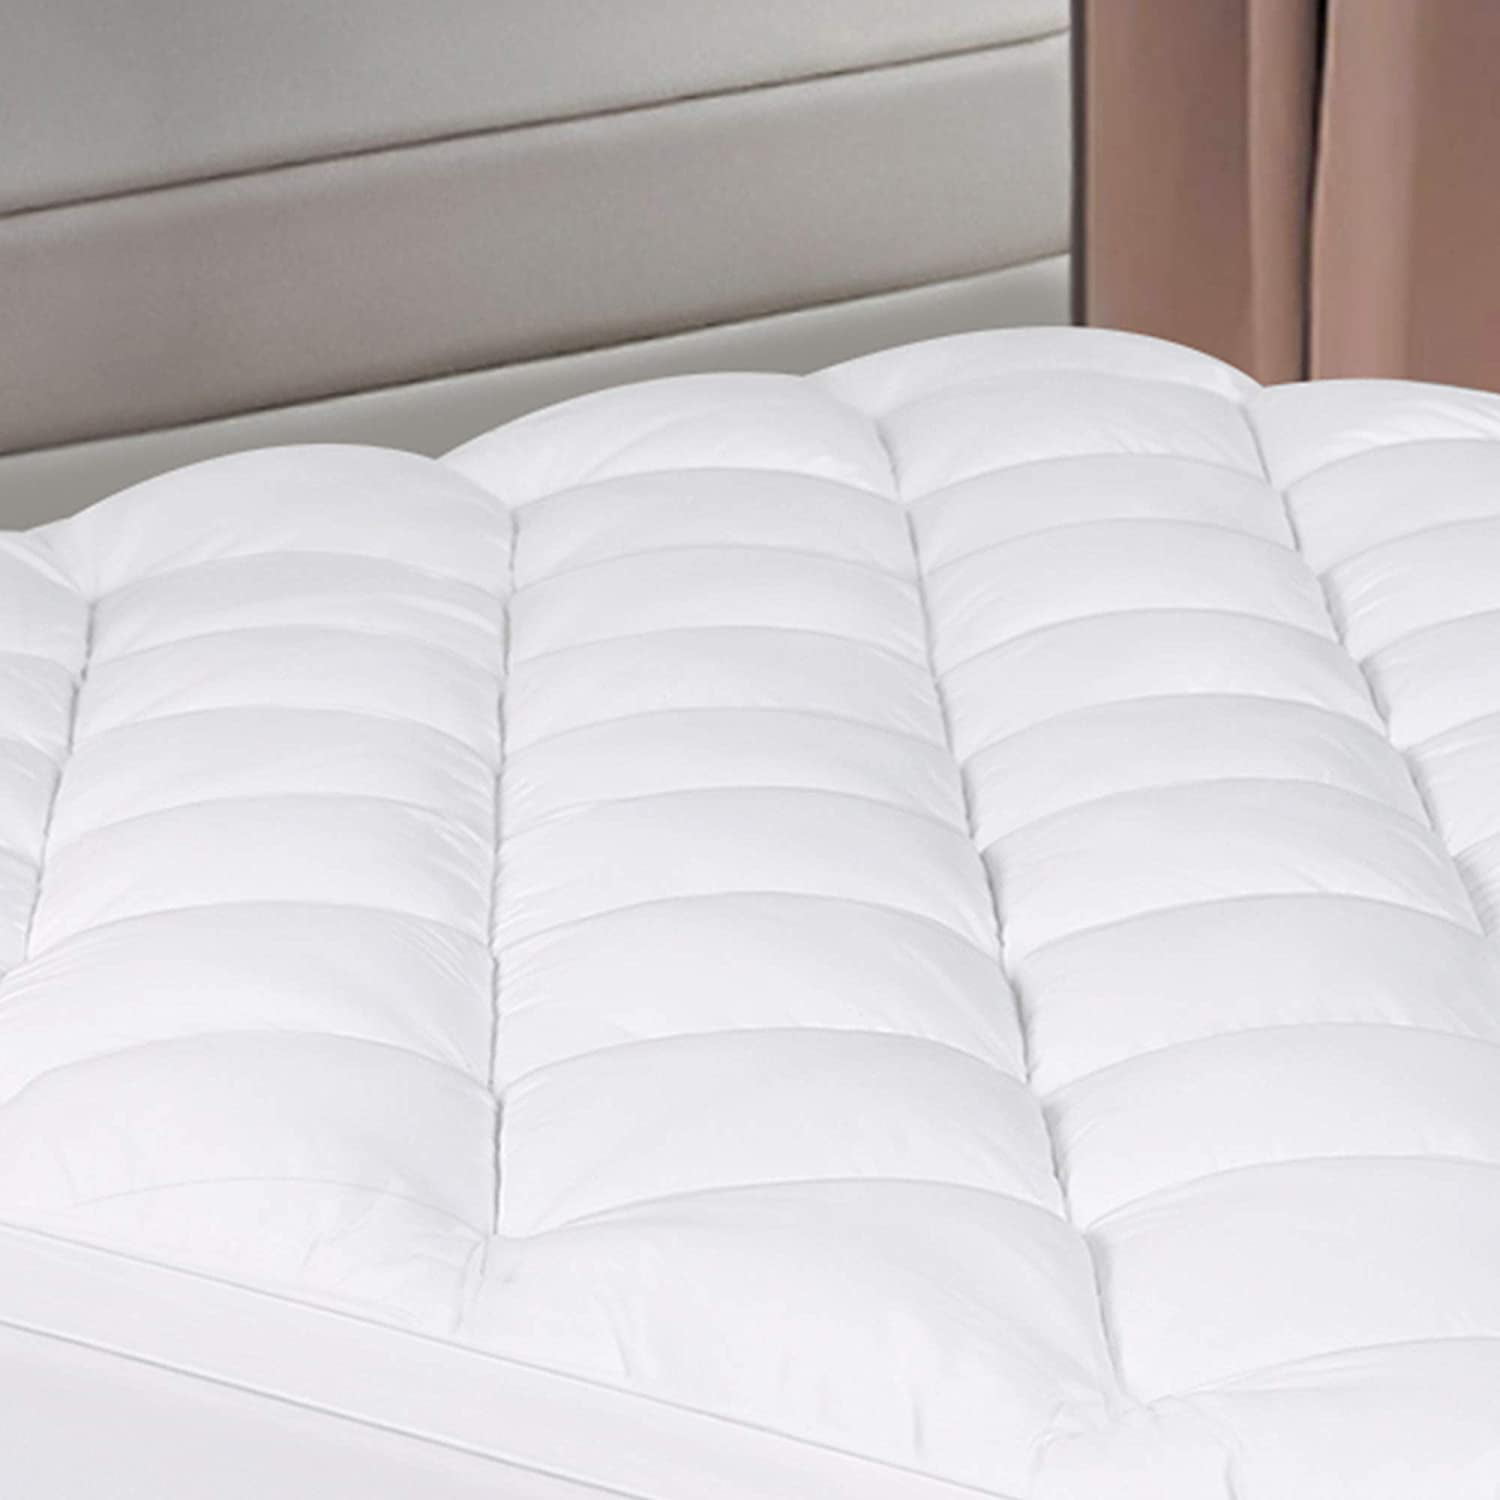 Details about   Extra Deep Waterproof Quilted Mattress Protector Bed Sheet Cover Topper Bedding 